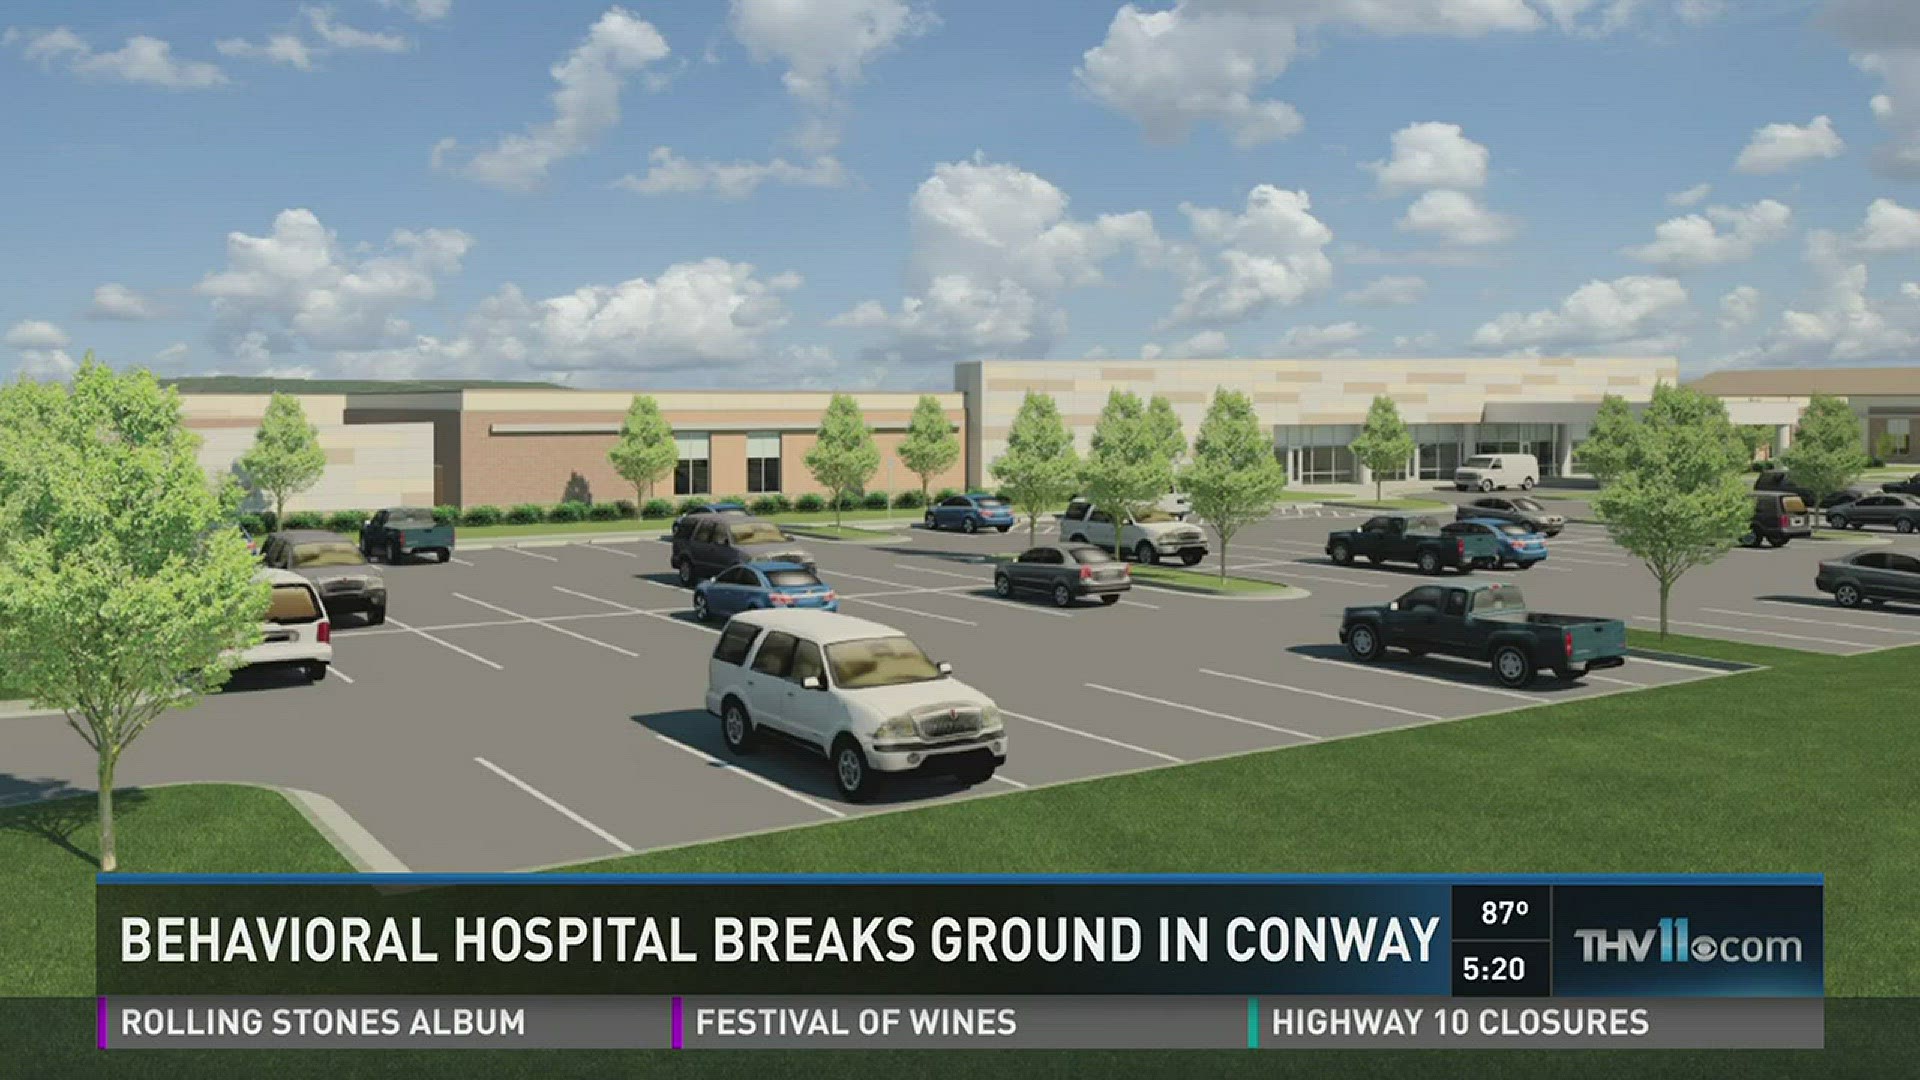 New behavioral hospital breaks ground in Conway